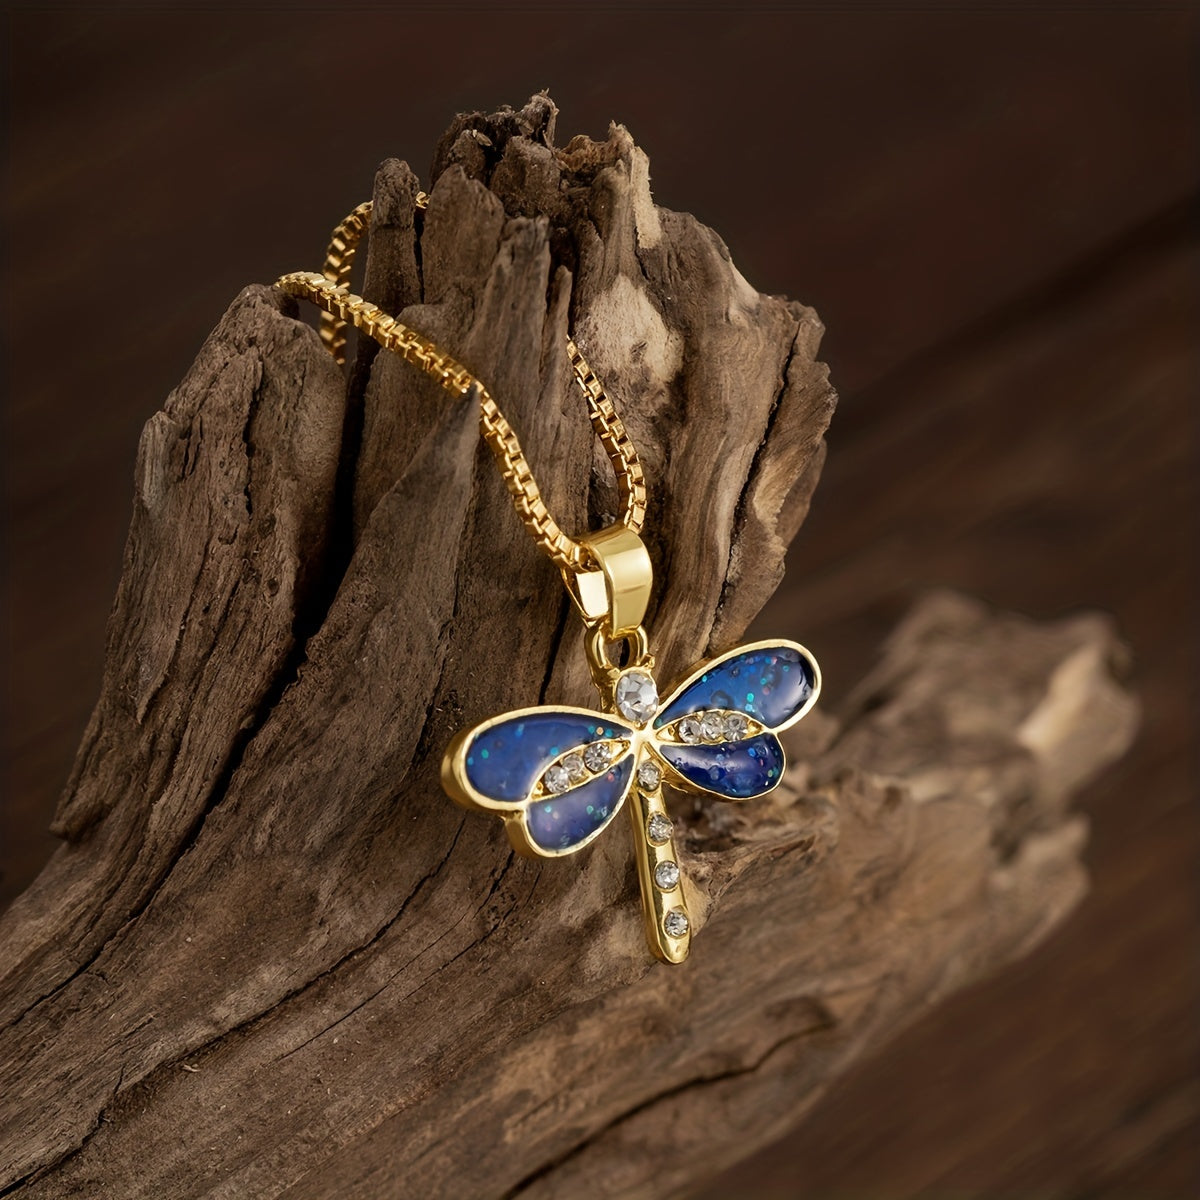 Gorgeous Vintage Dragonfly Pendant Necklace - Perfect for Animal Lovers!